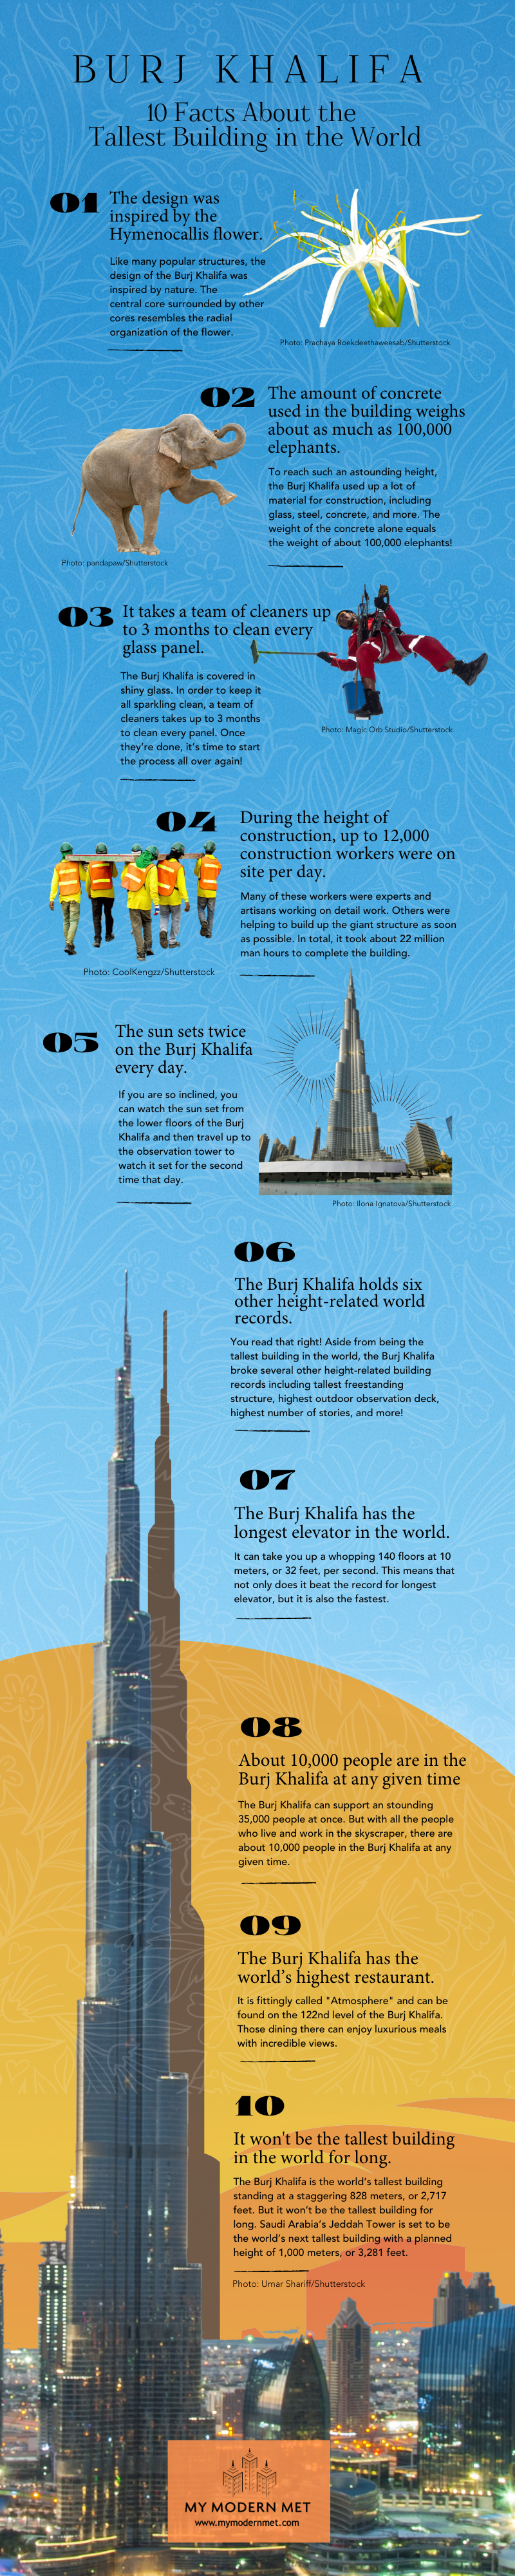 Charting the Tallest Buildings in the World Side by Side (infographic)